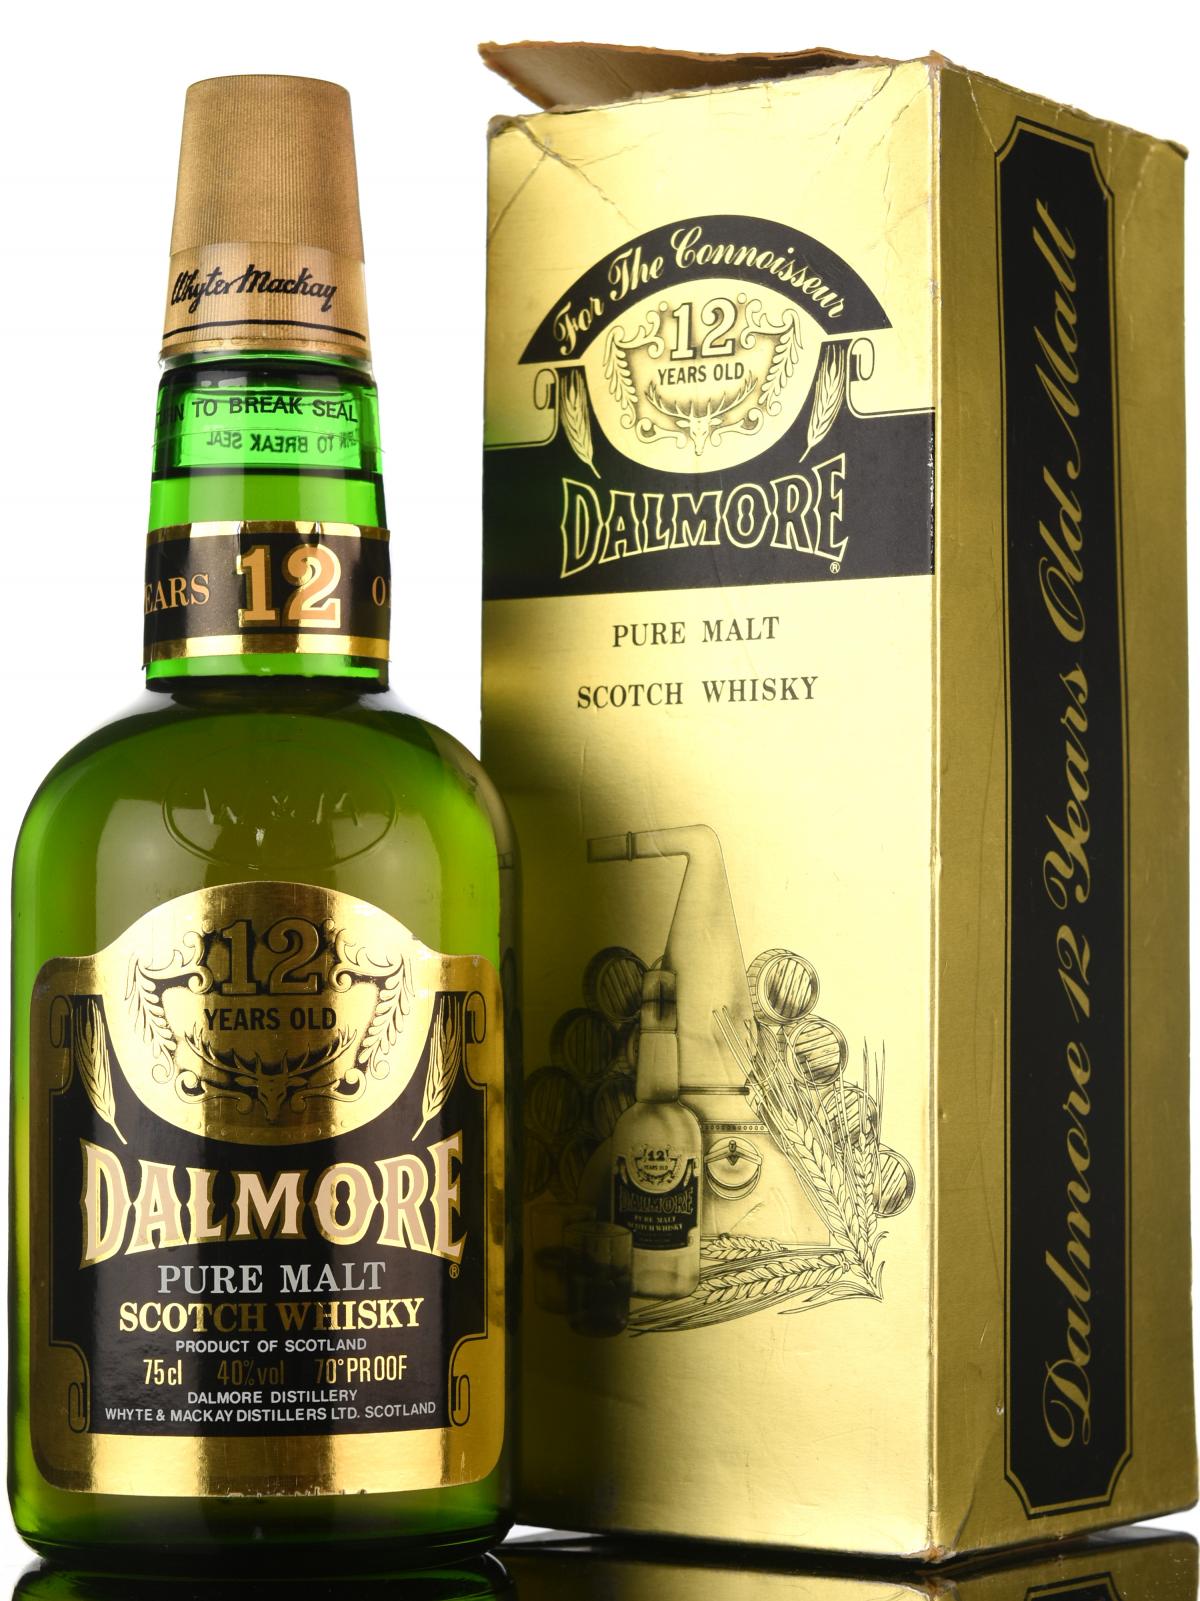 Dalmore 12 Year Old - Late 1970s